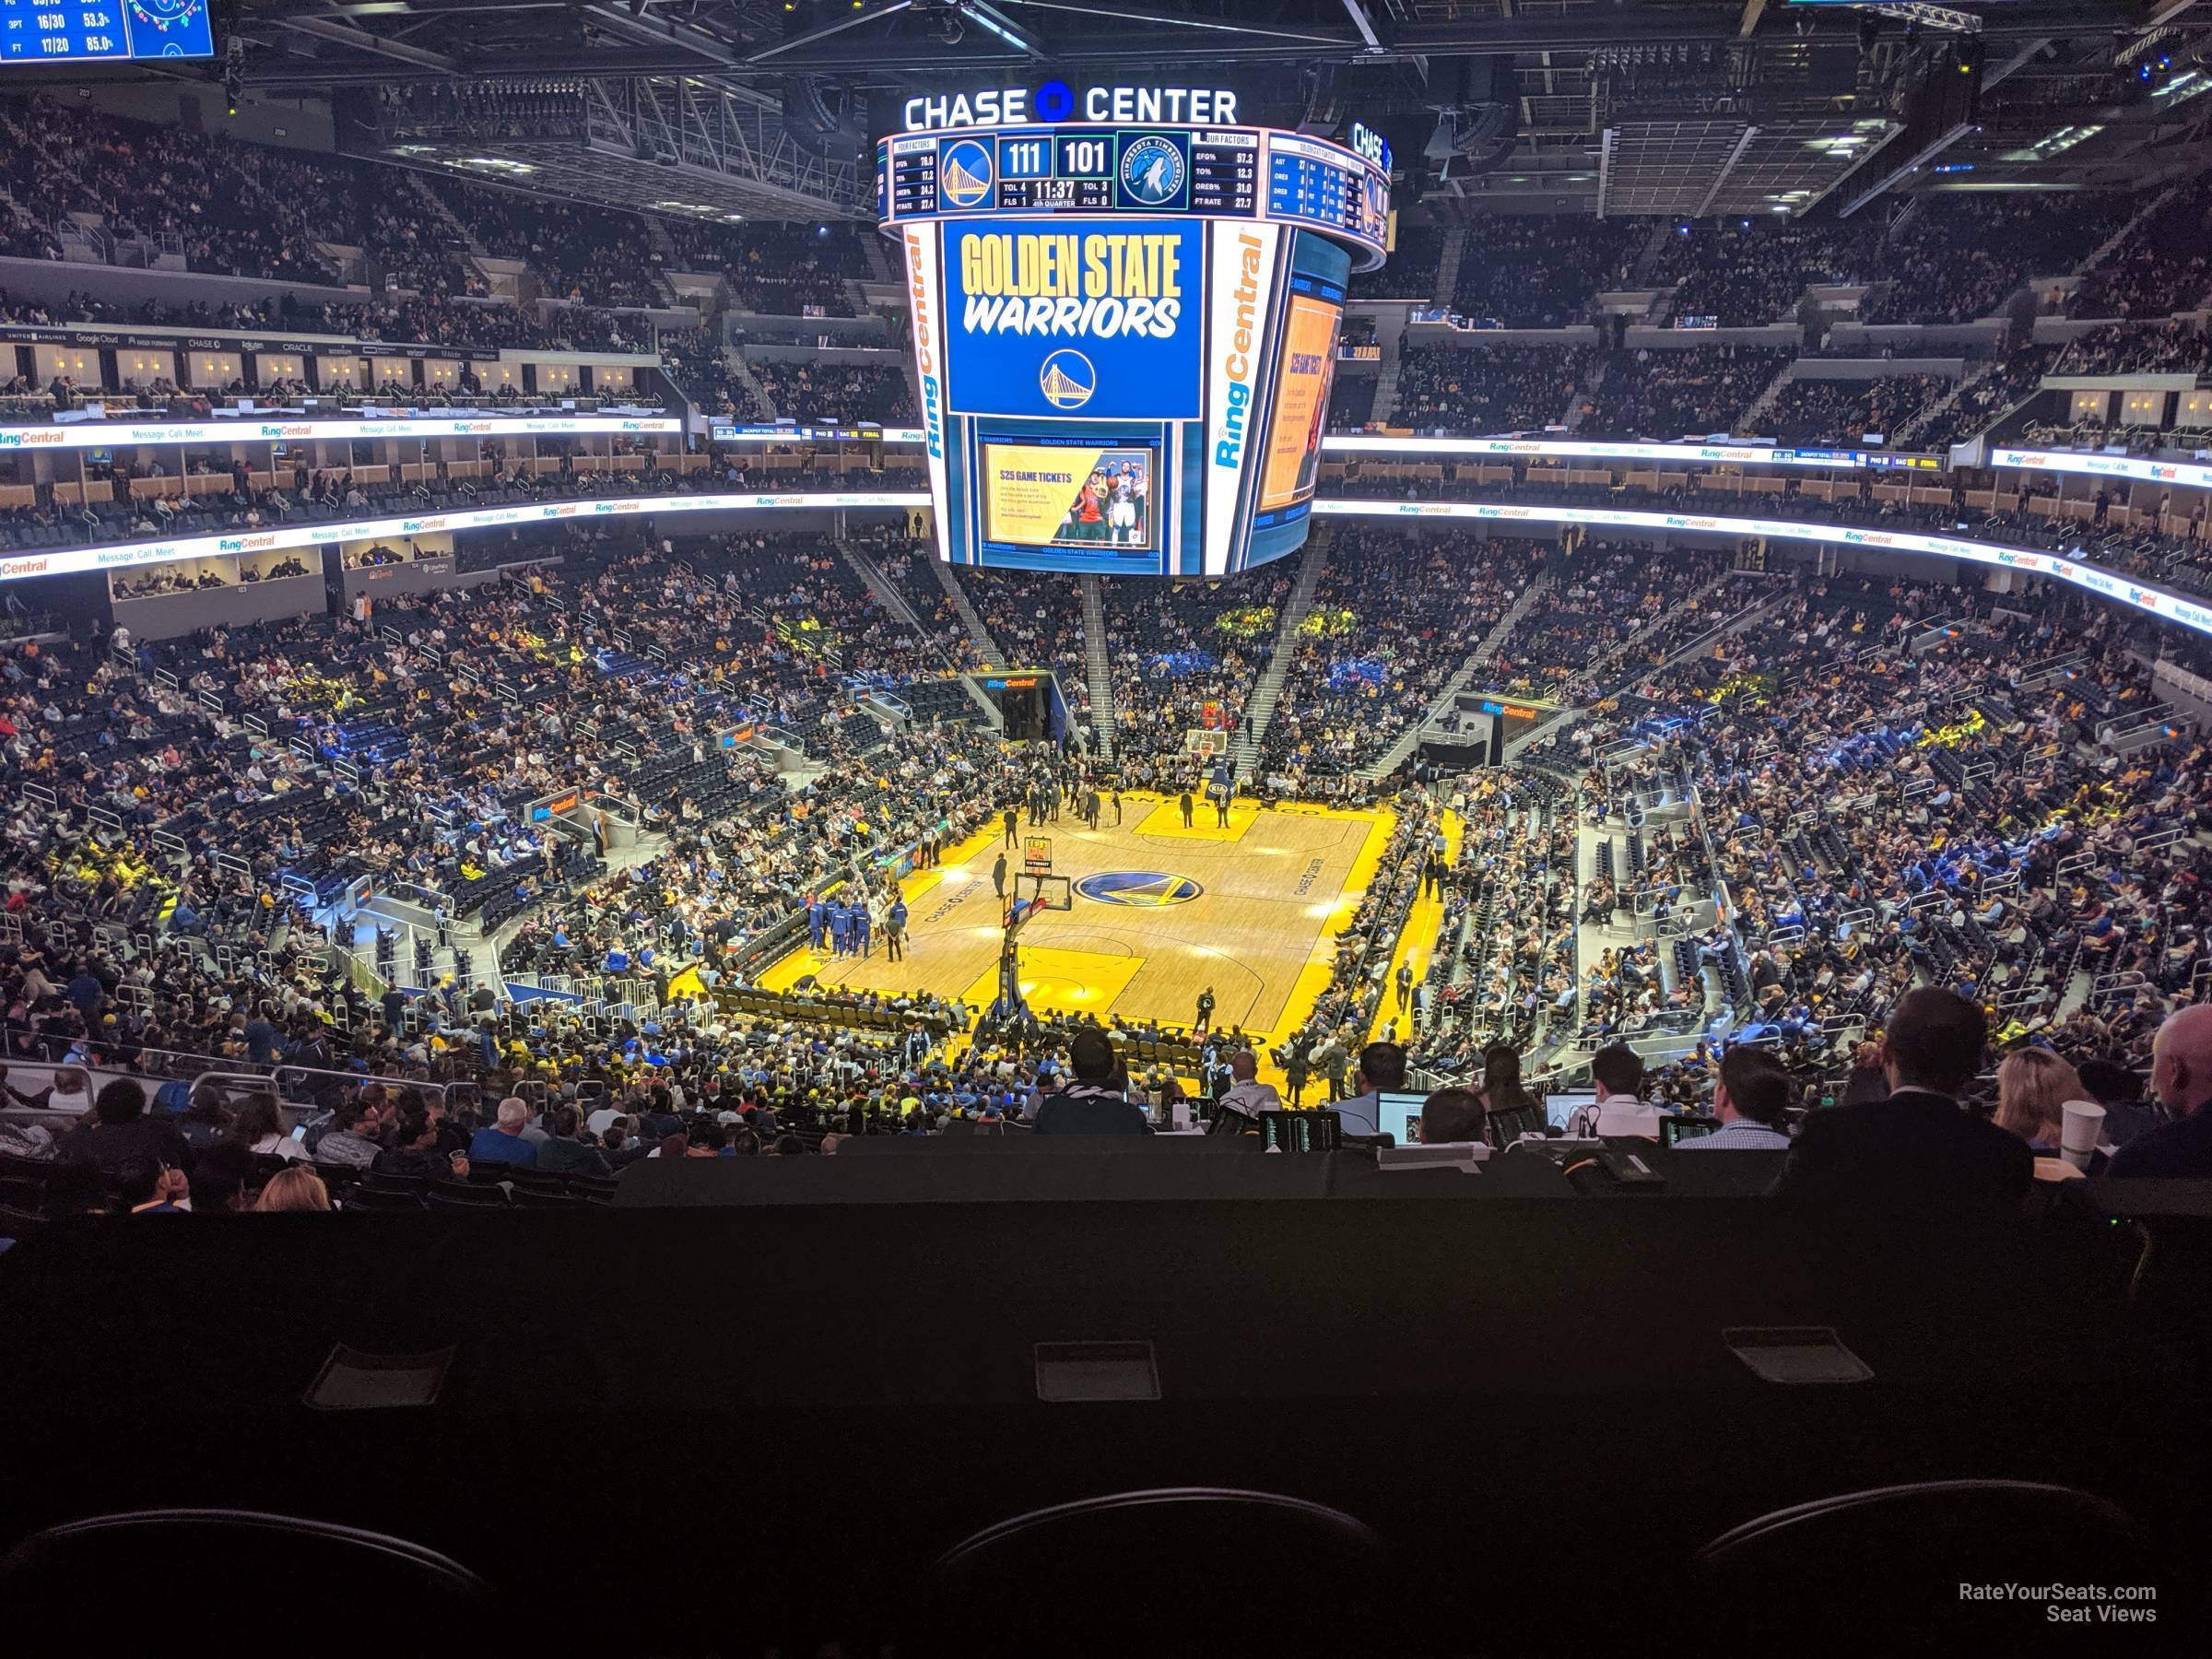 section 126, row 18 seat view  for basketball - chase center